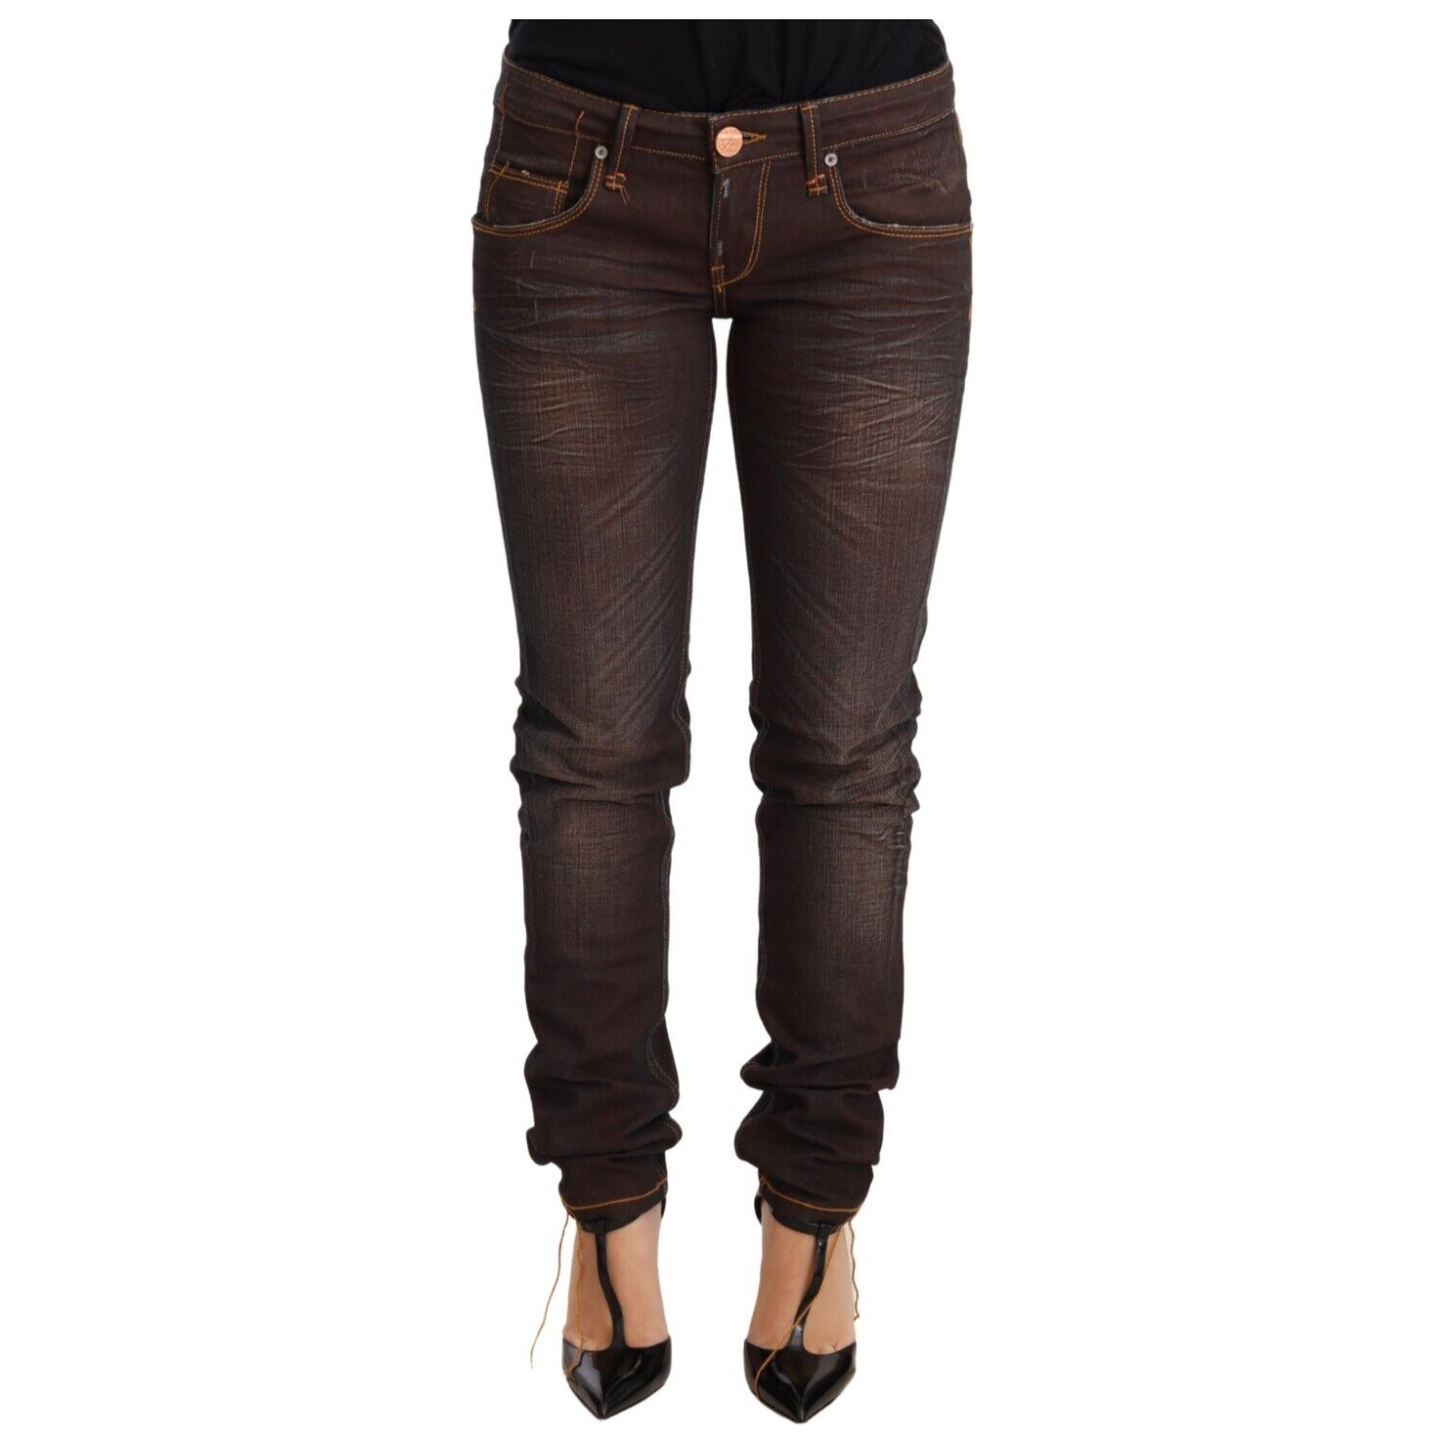 Acht Chic Low Waist Skinny Brown Jeans Jeans & Pants brown-washed-cotton-slim-fit-denim-low-waist-trouser-jeans s-l1600-25-a8323a50-a98.png